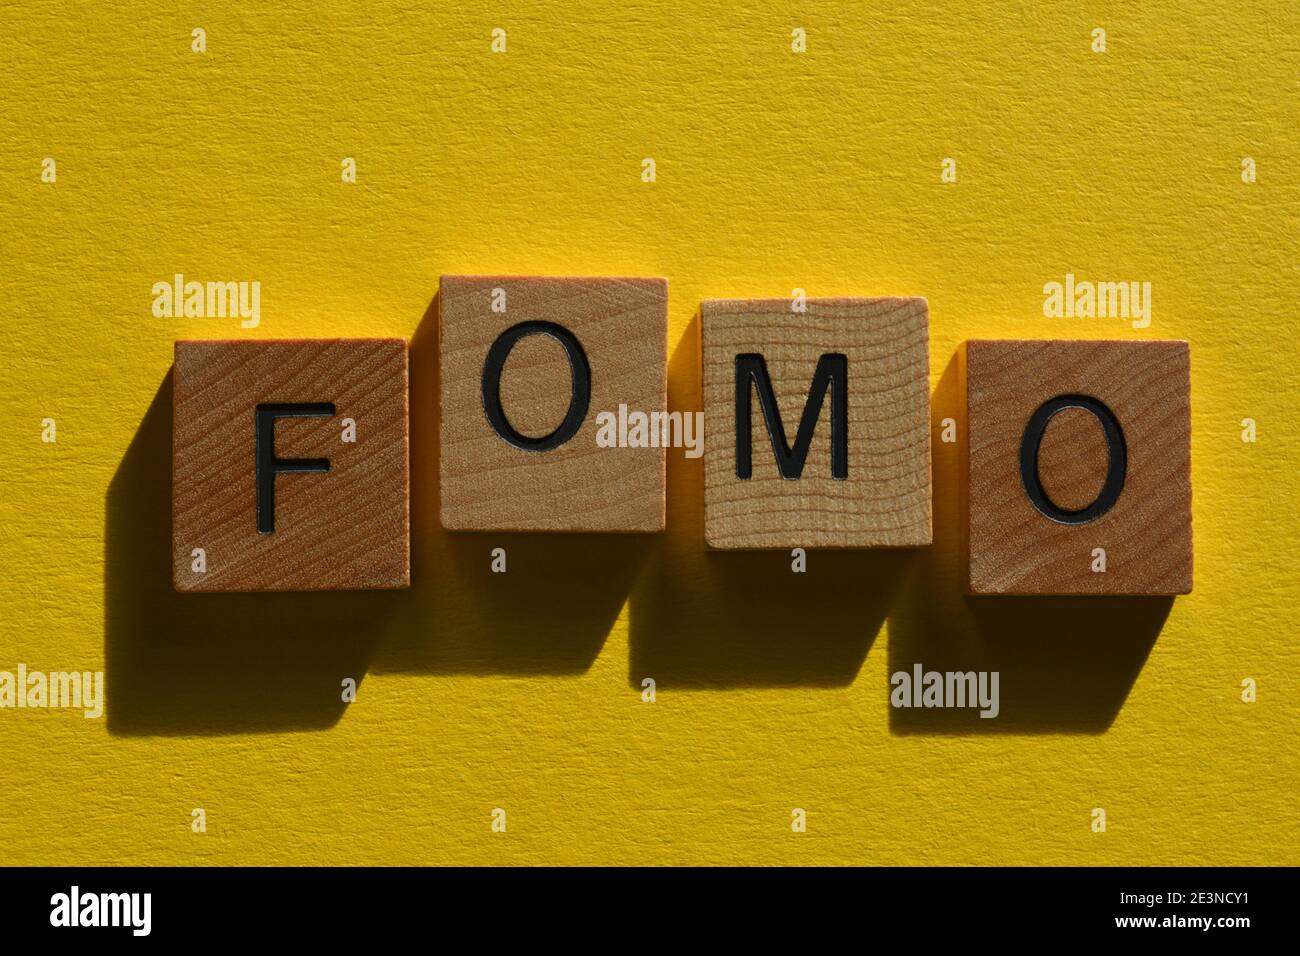 FOMO, acronym. Fear of Missing Out Stock Photo - Alamy